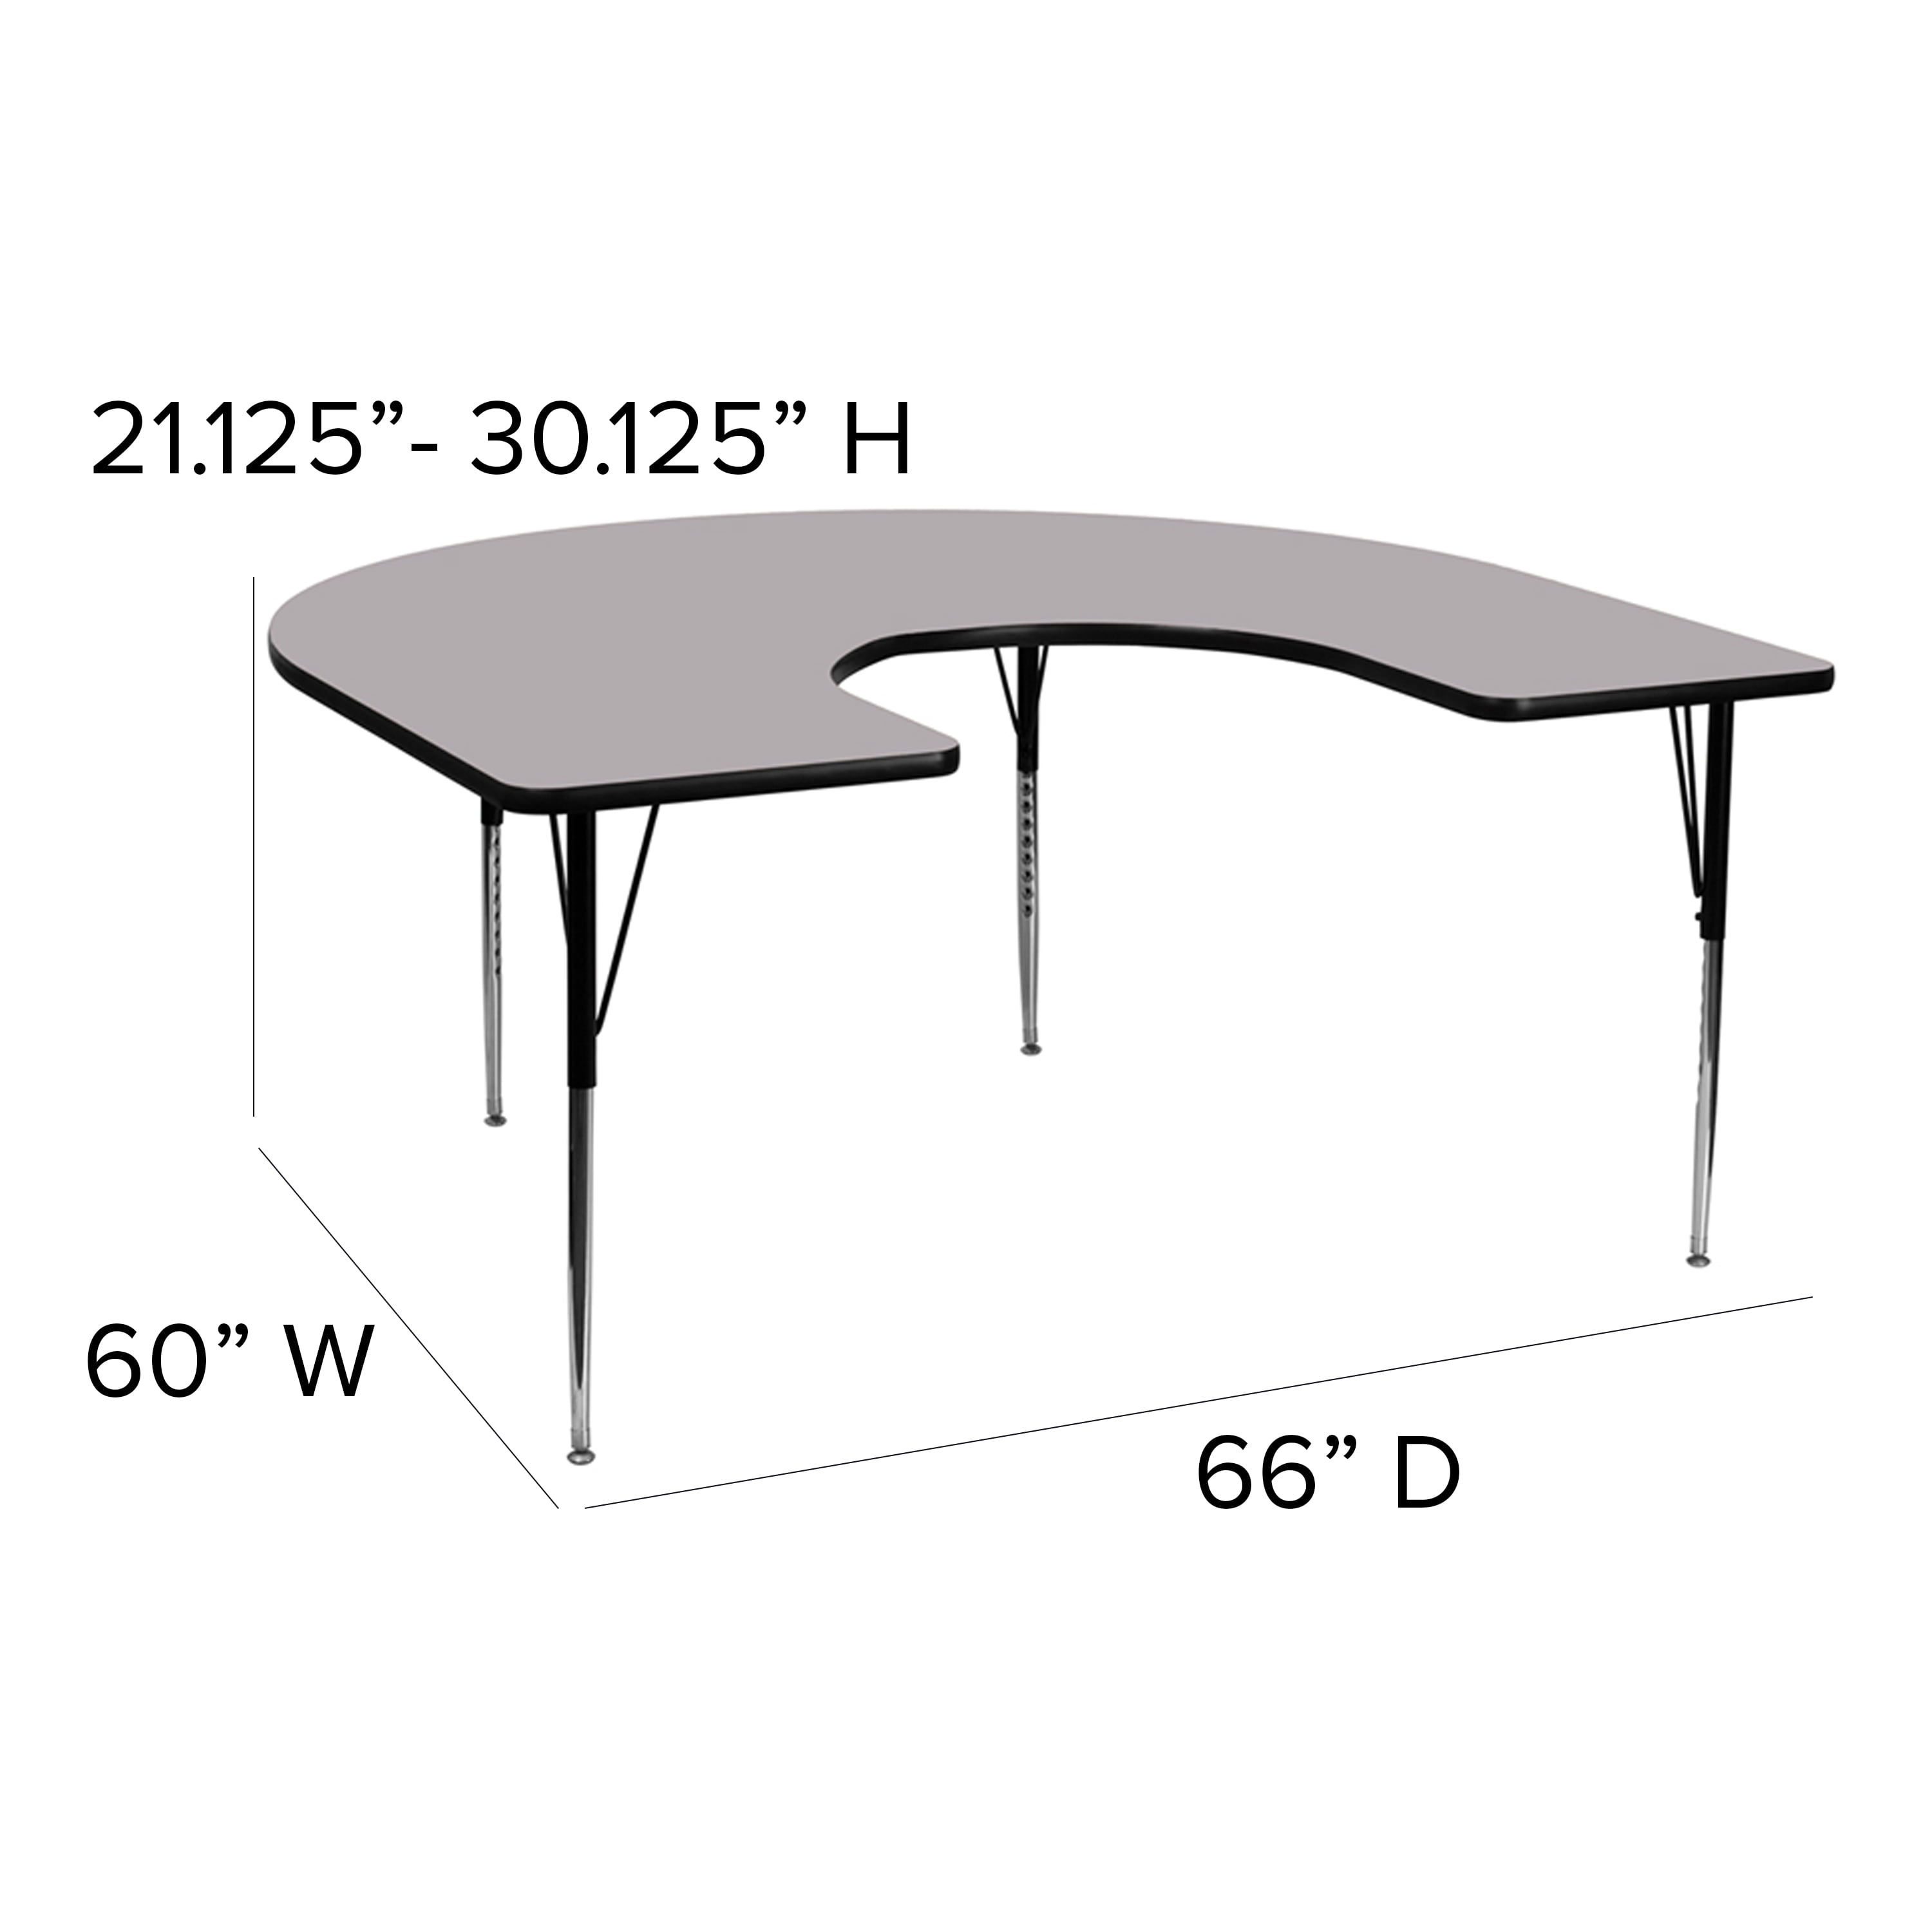 Berries Horseshoe Activity Table - 60 X 66, Mobile - Driftwood Gray/